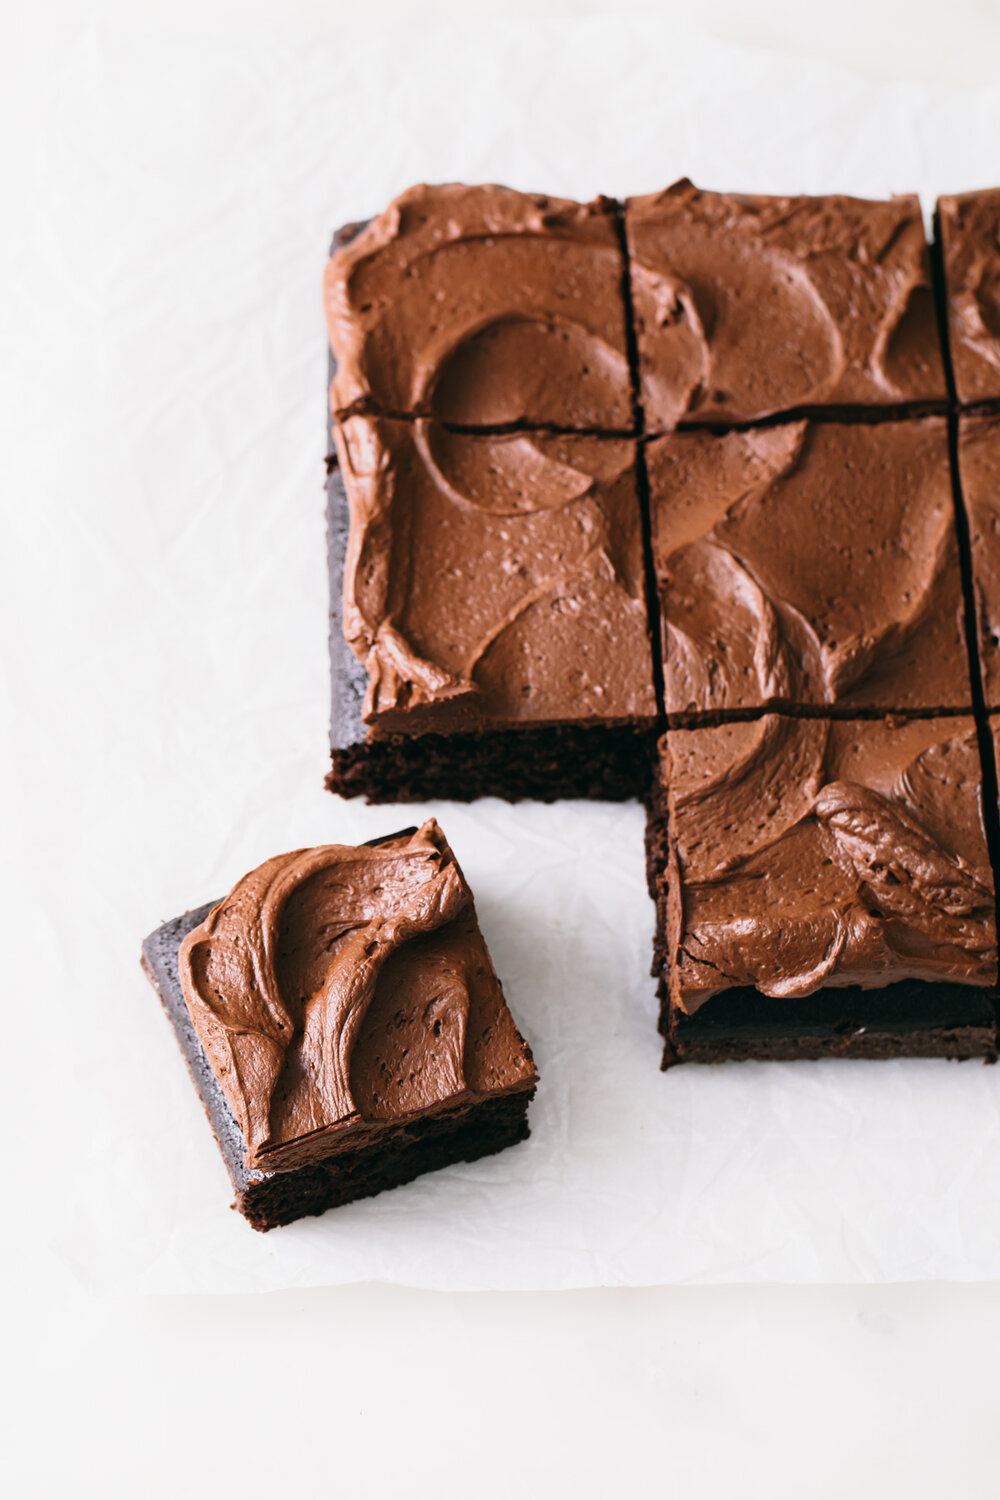 A sliced chocolate sheet cake with swirls of fluffy whipped chocolate ganache frosting.